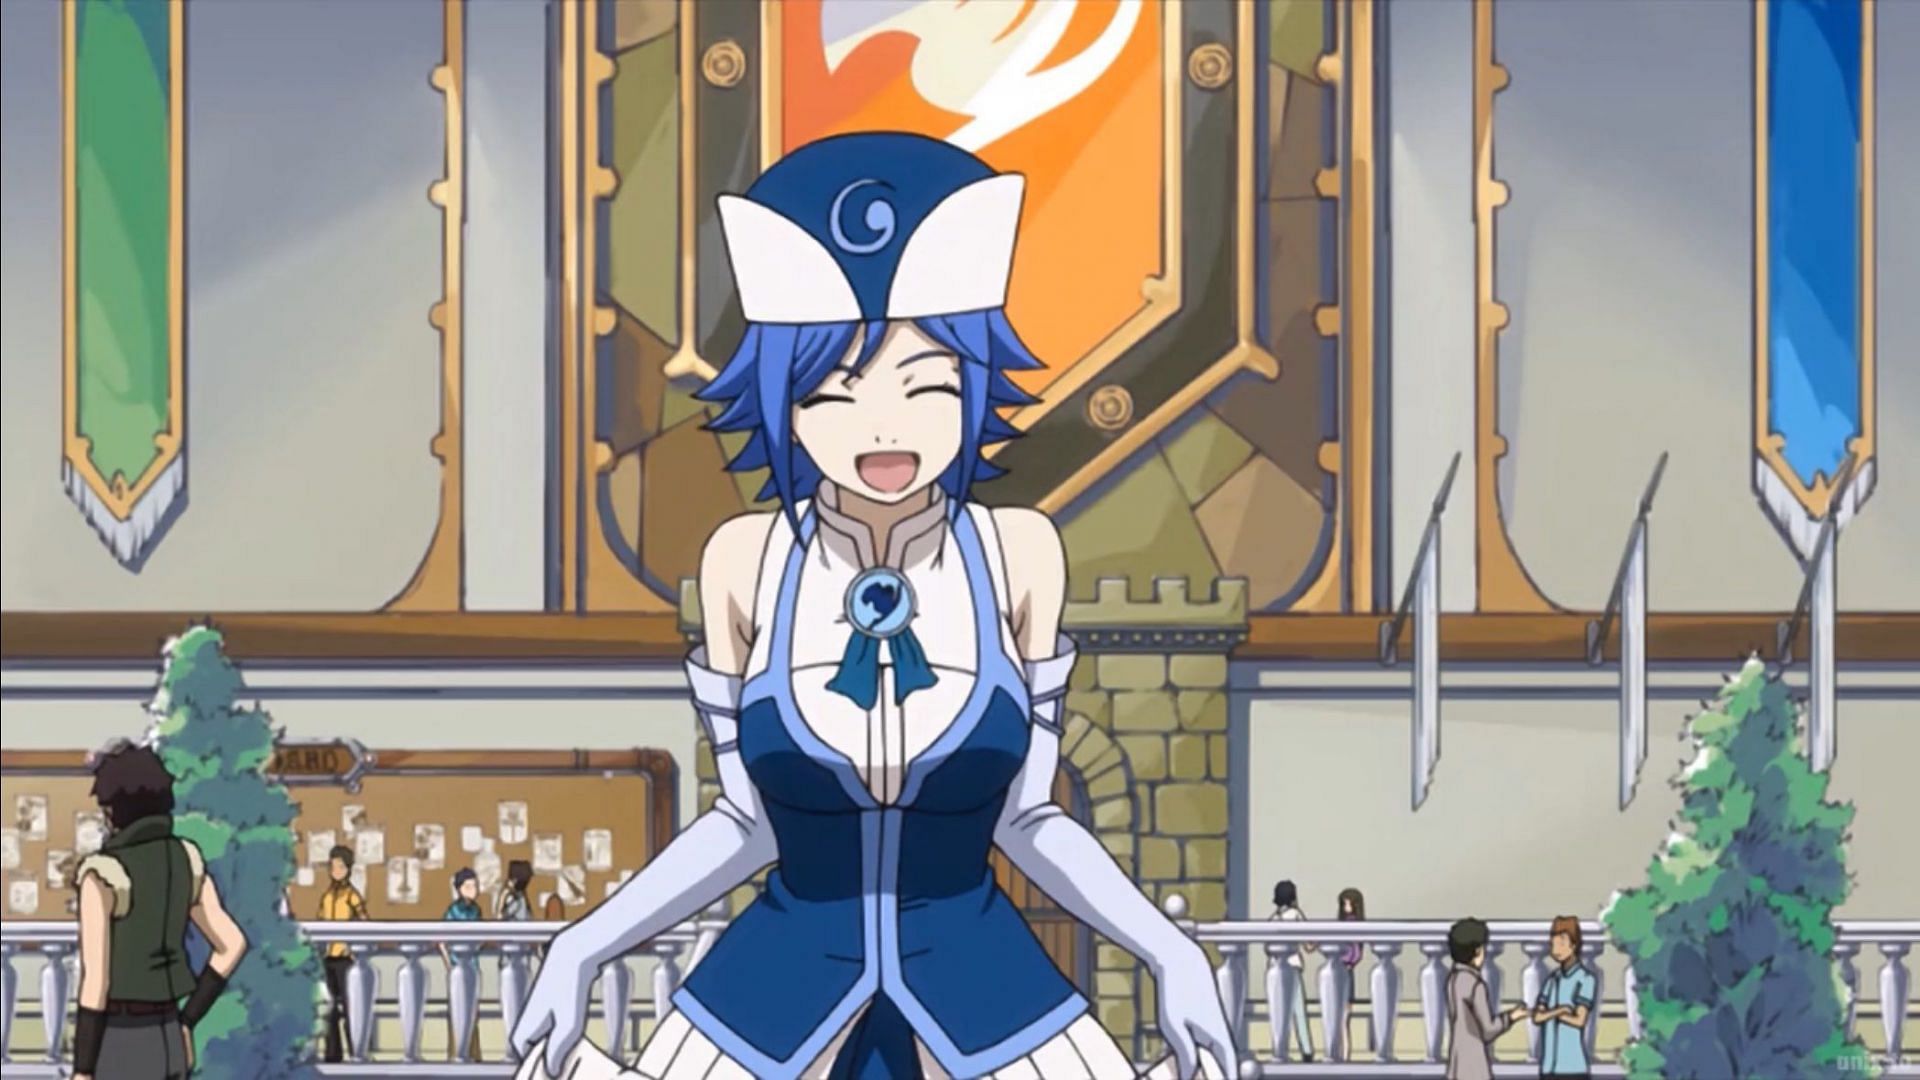 Juvia Lockser in Fairy Tail (Image via A-1 Pictures)